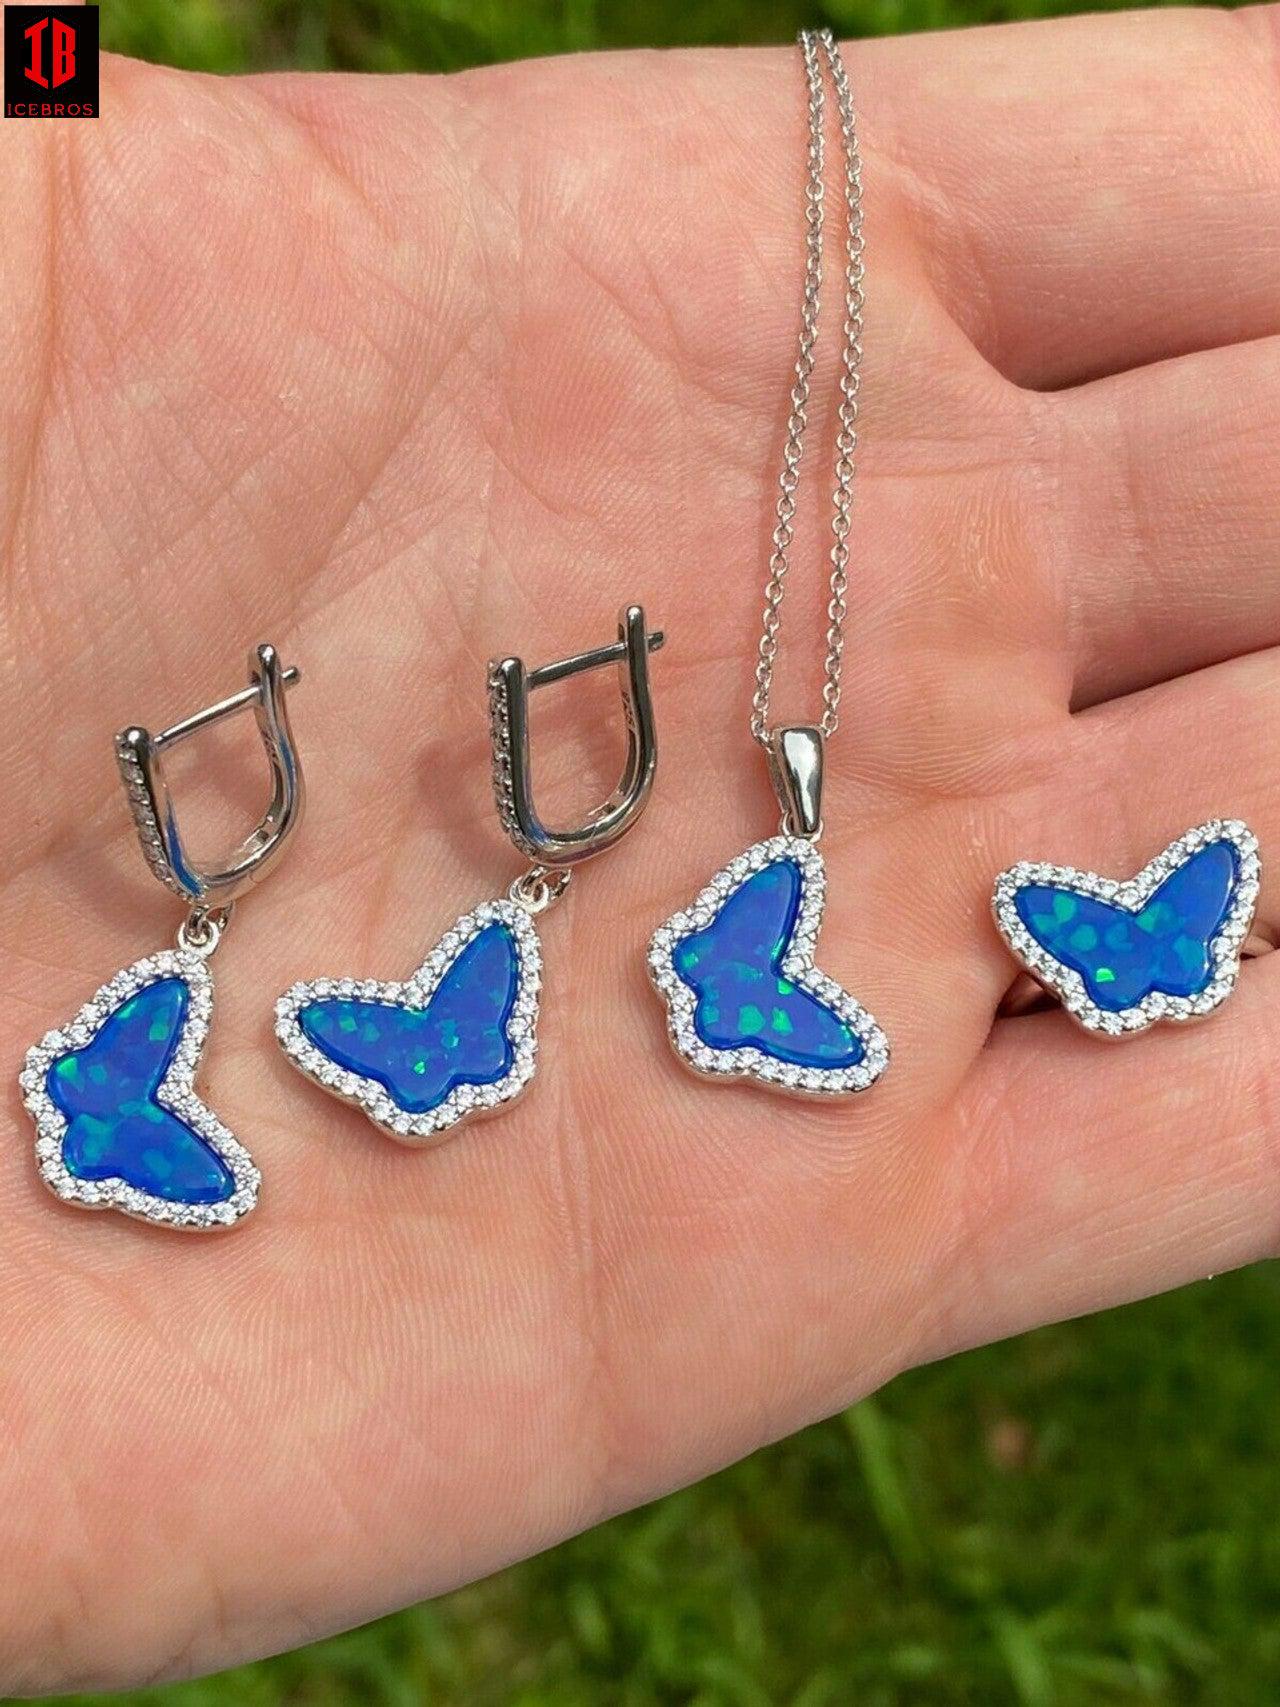 Real 925 Sterling Silver Butterfly Blue Opal Ring Necklace & Earrings Ladies Set